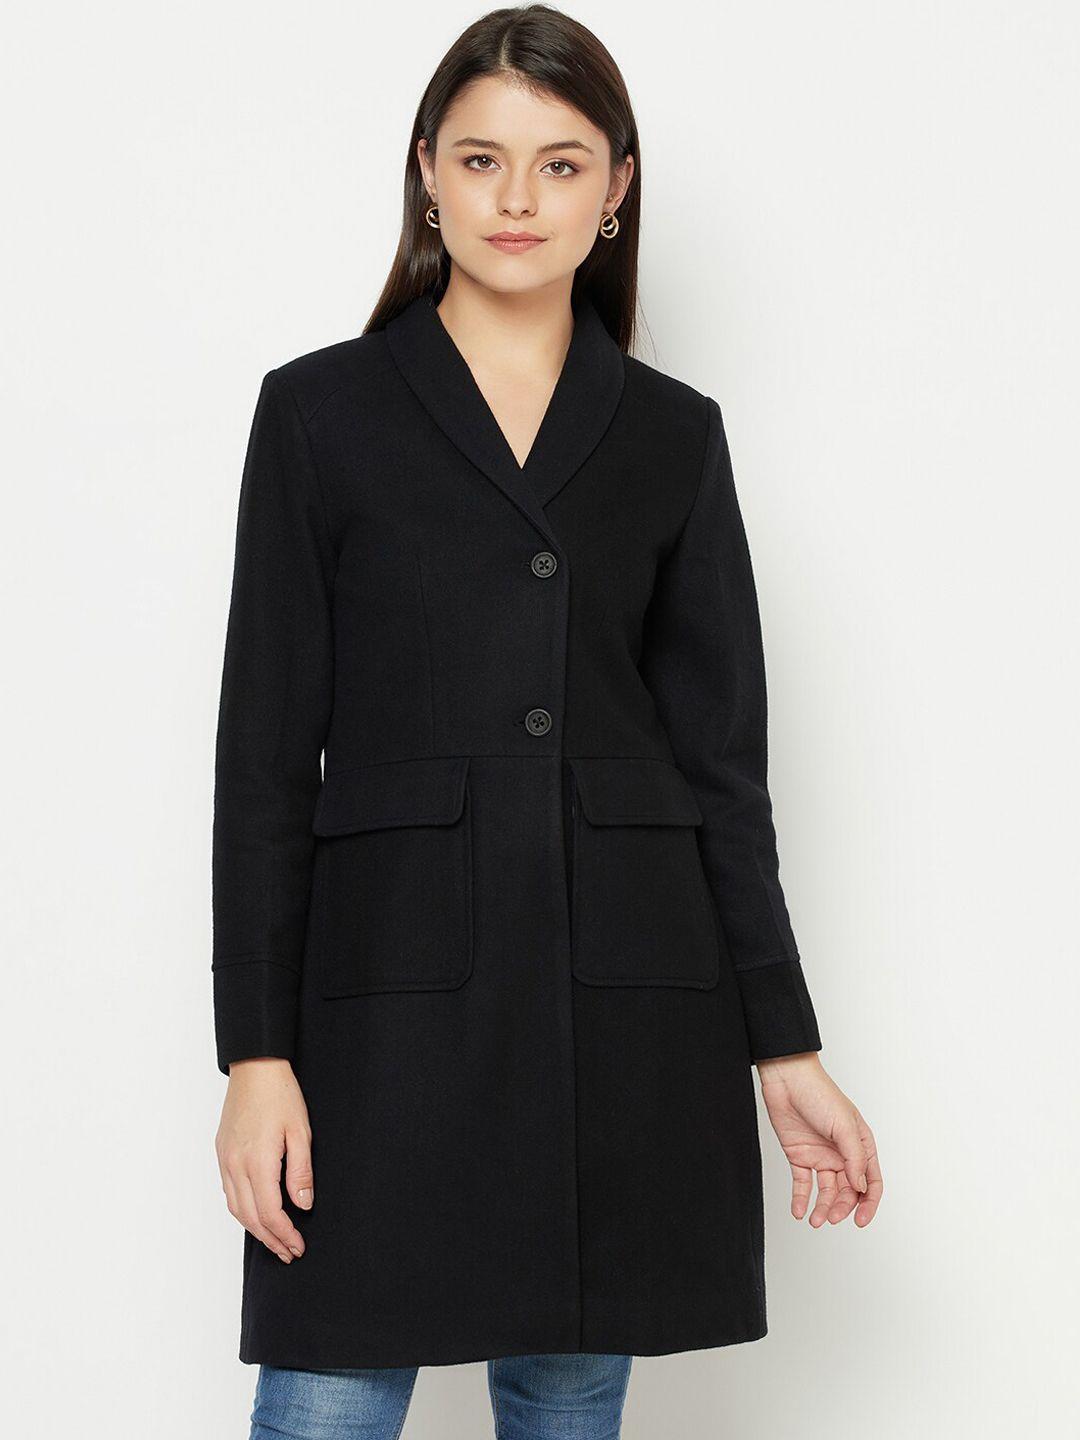 owncraft women black solid trench coat